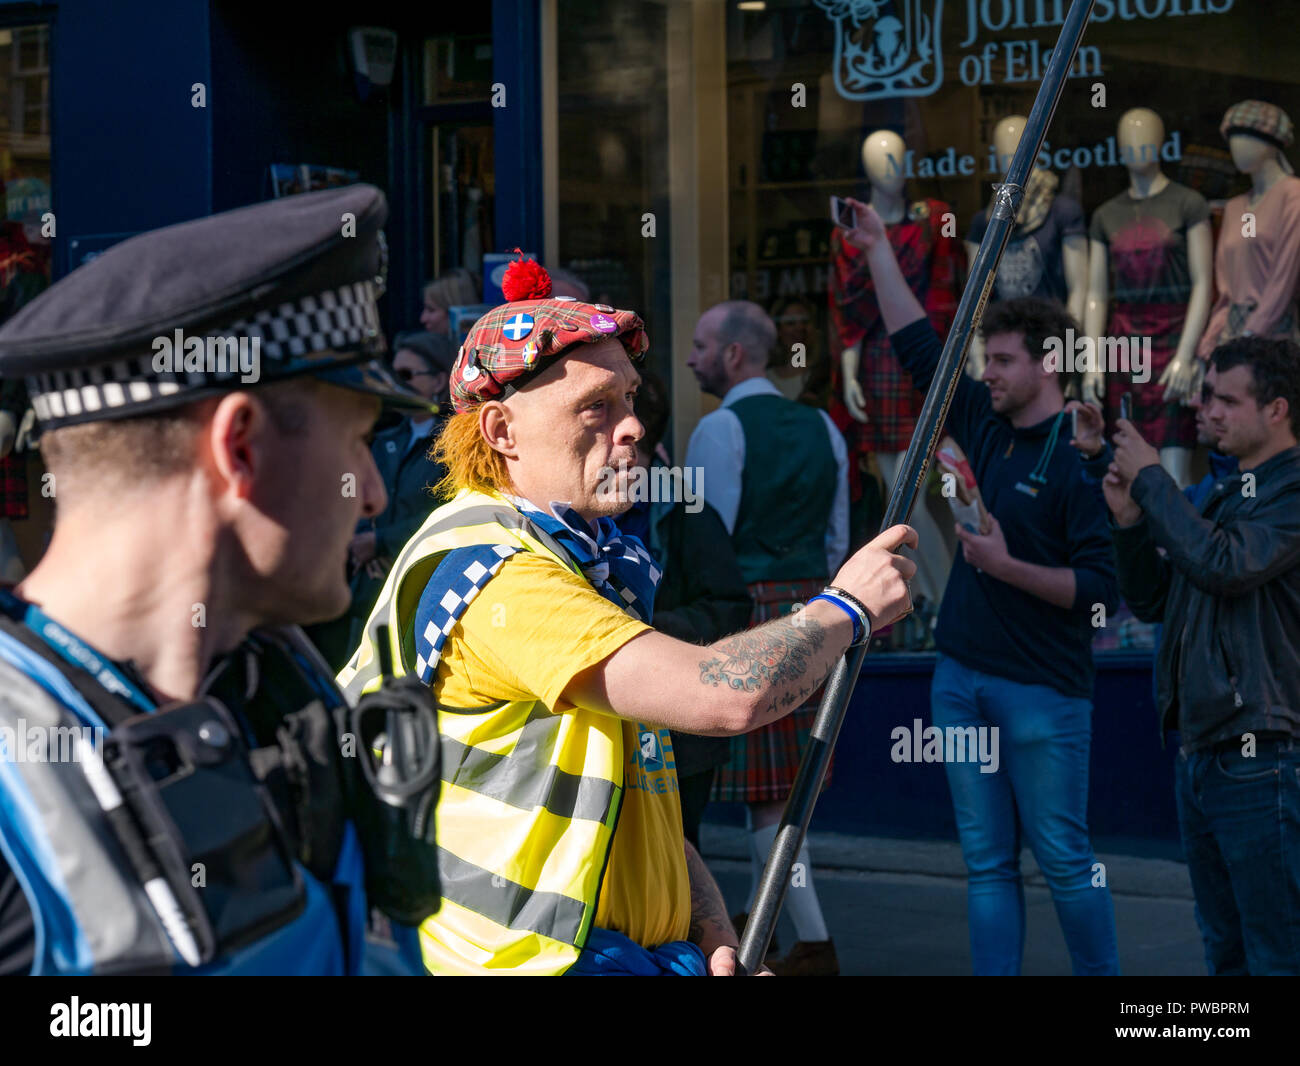 Gary Kelly in see you Jimmy hat leading All Under One Banner Scottish Independence march 2018 with police escort, Royal Mile, Edinburgh, Scotland, UK Stock Photo